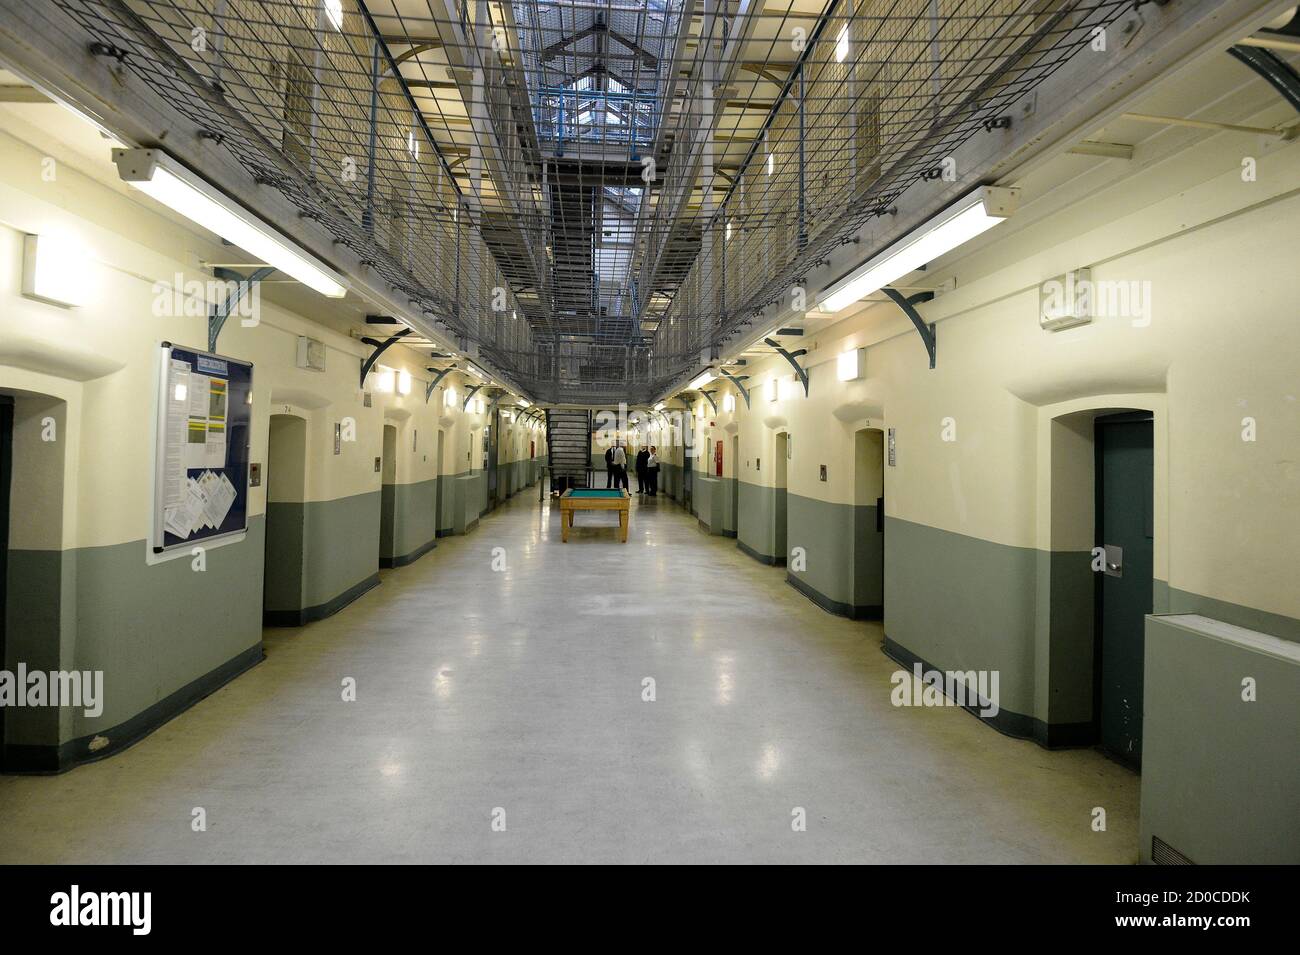 A general view shows C wing at Wormwood Scrubs prison in London, October 22, 2012.   REUTERS/Paul Hackett  (BRITAIN - Tags: CRIME LAW) Stock Photo